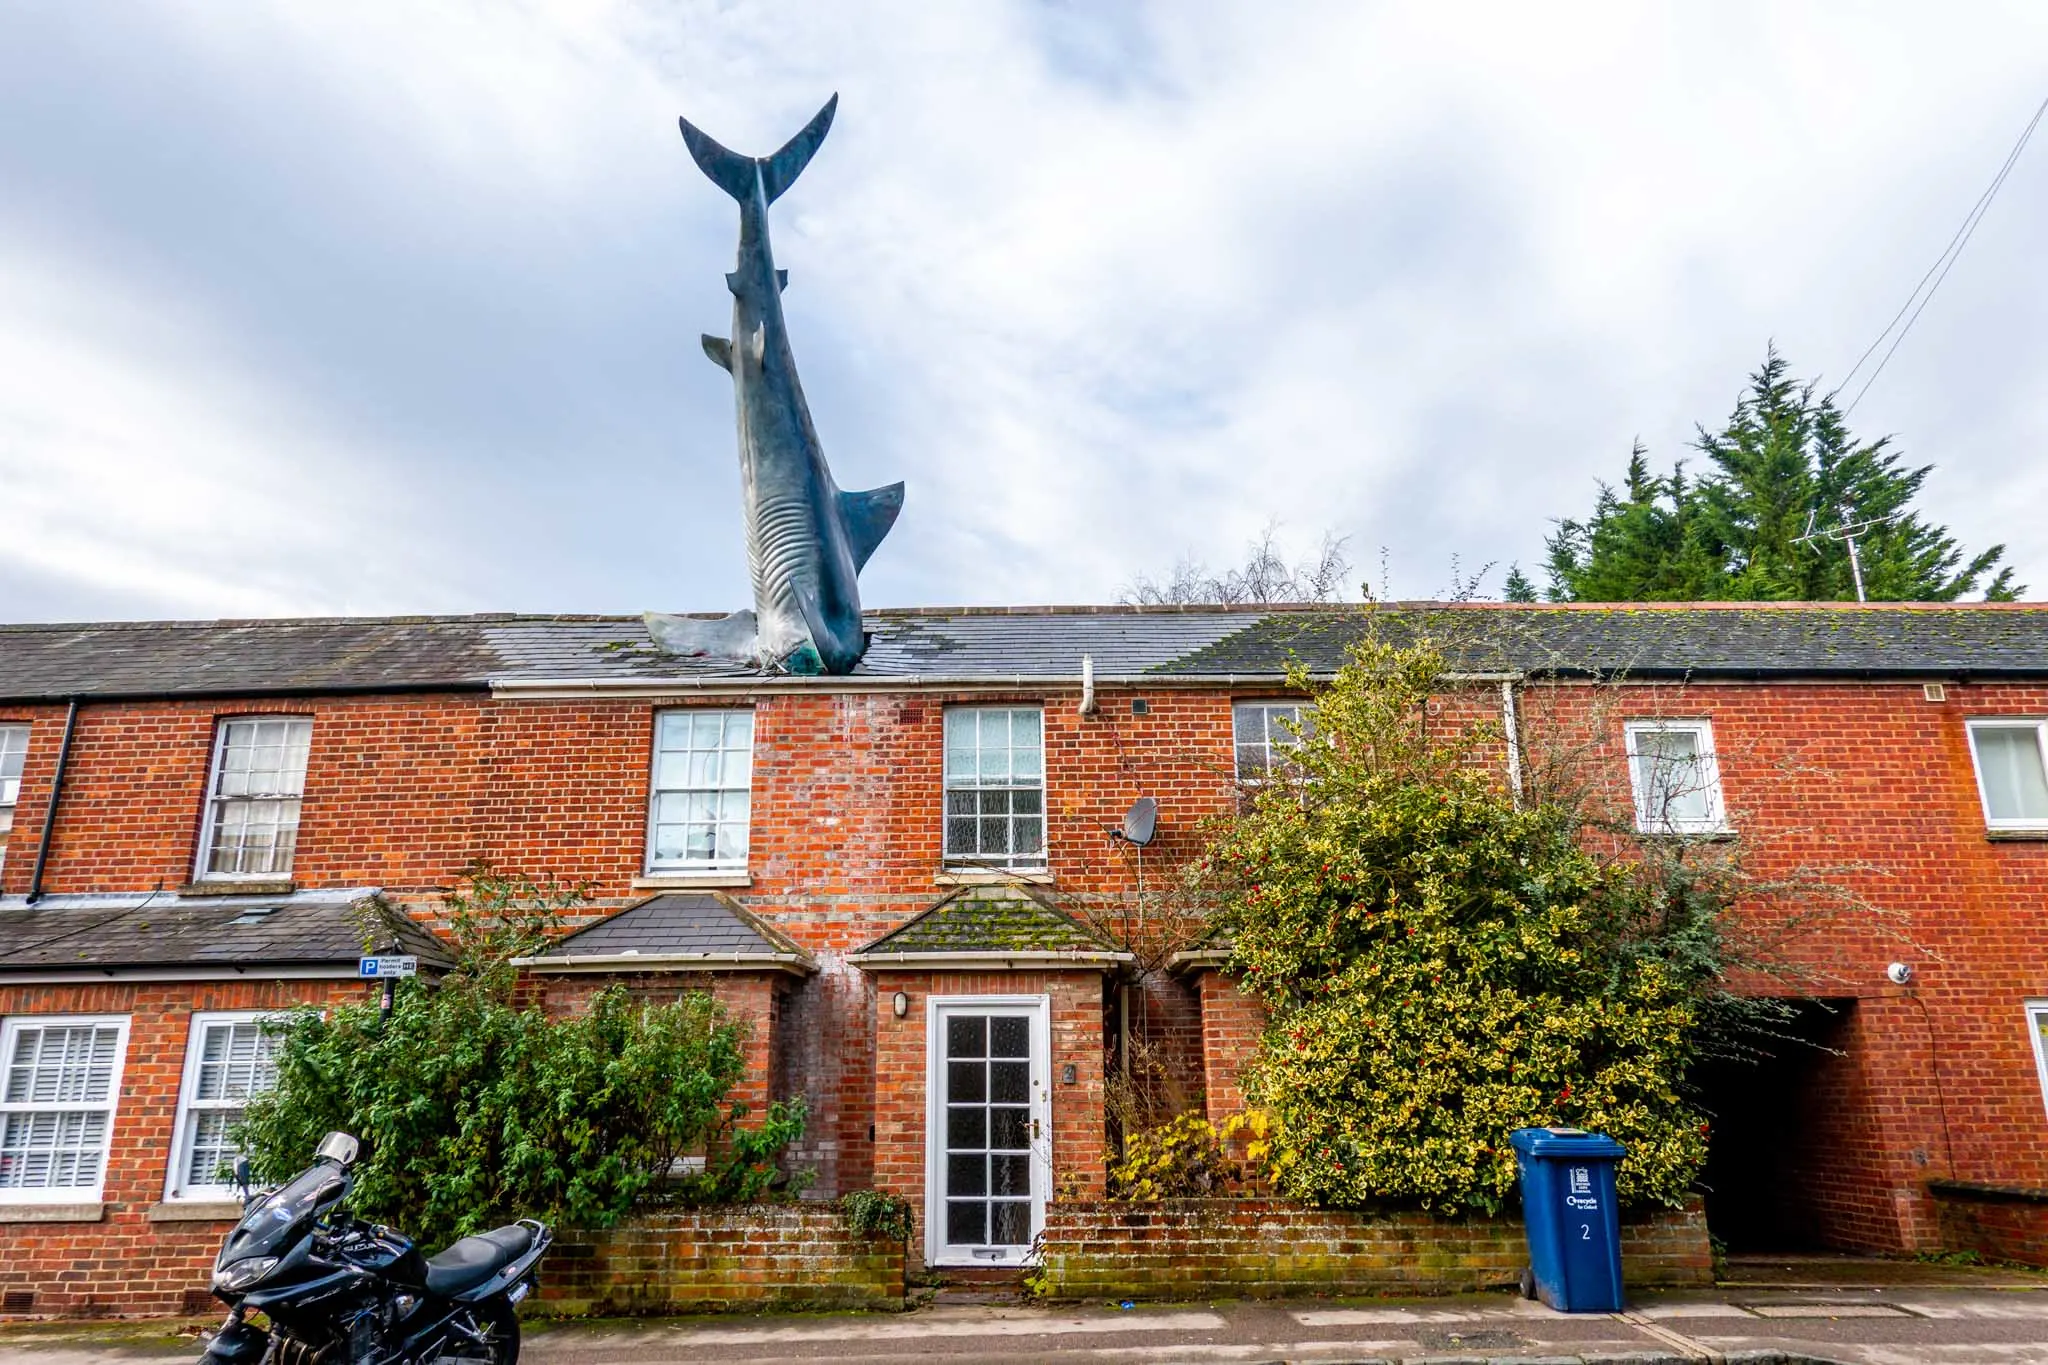 Shark sculpture protruding from the roof of a home.